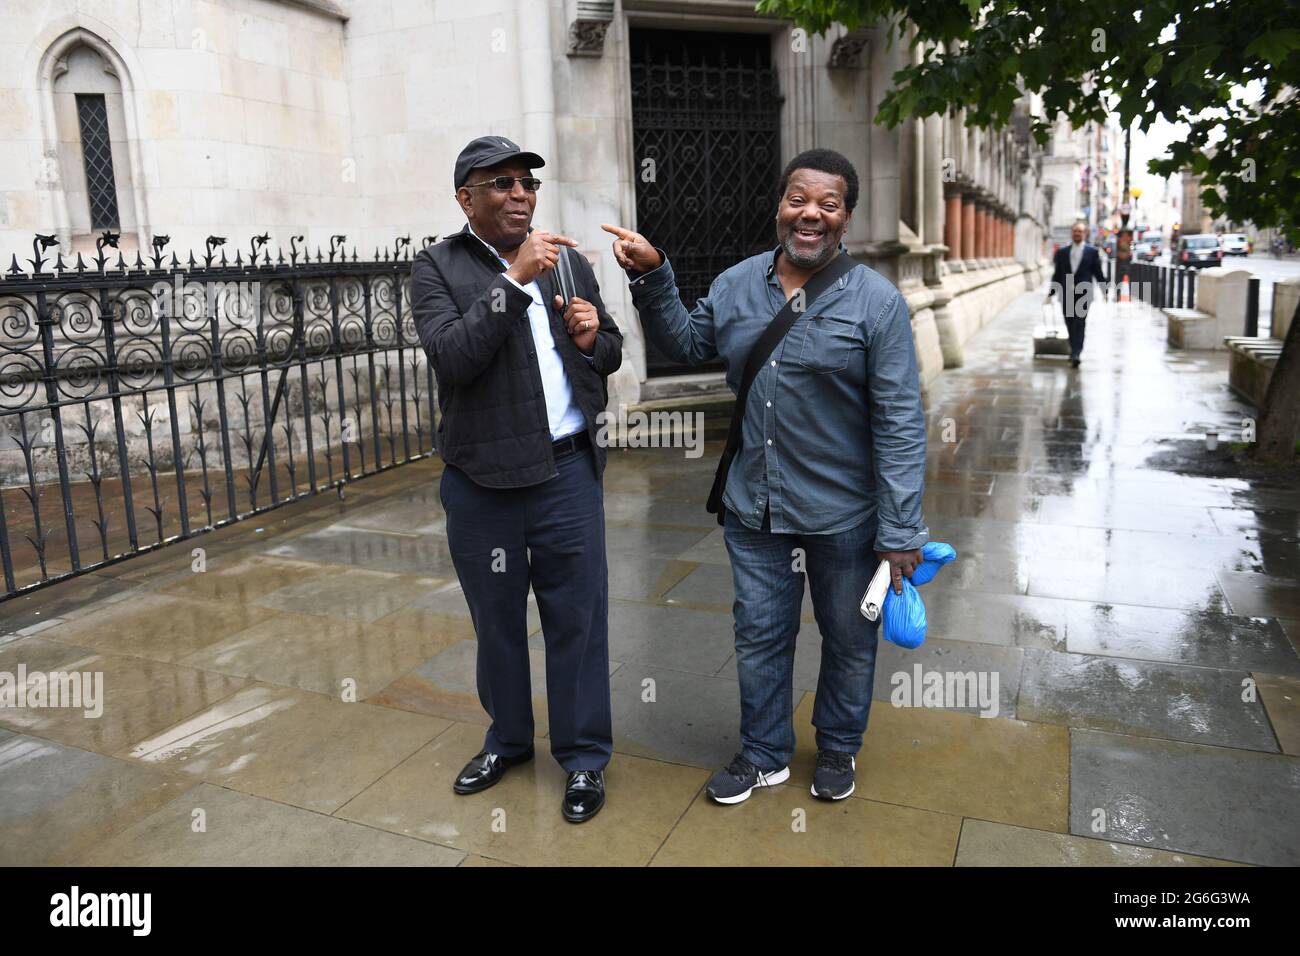 Paul Green (left) and Cleveland Davidson outside the Royal Courts of  Justice in London. The pair along with Courtney Harriot, were jailed for  allegedly attempting to rob a corrupt police officer nearly